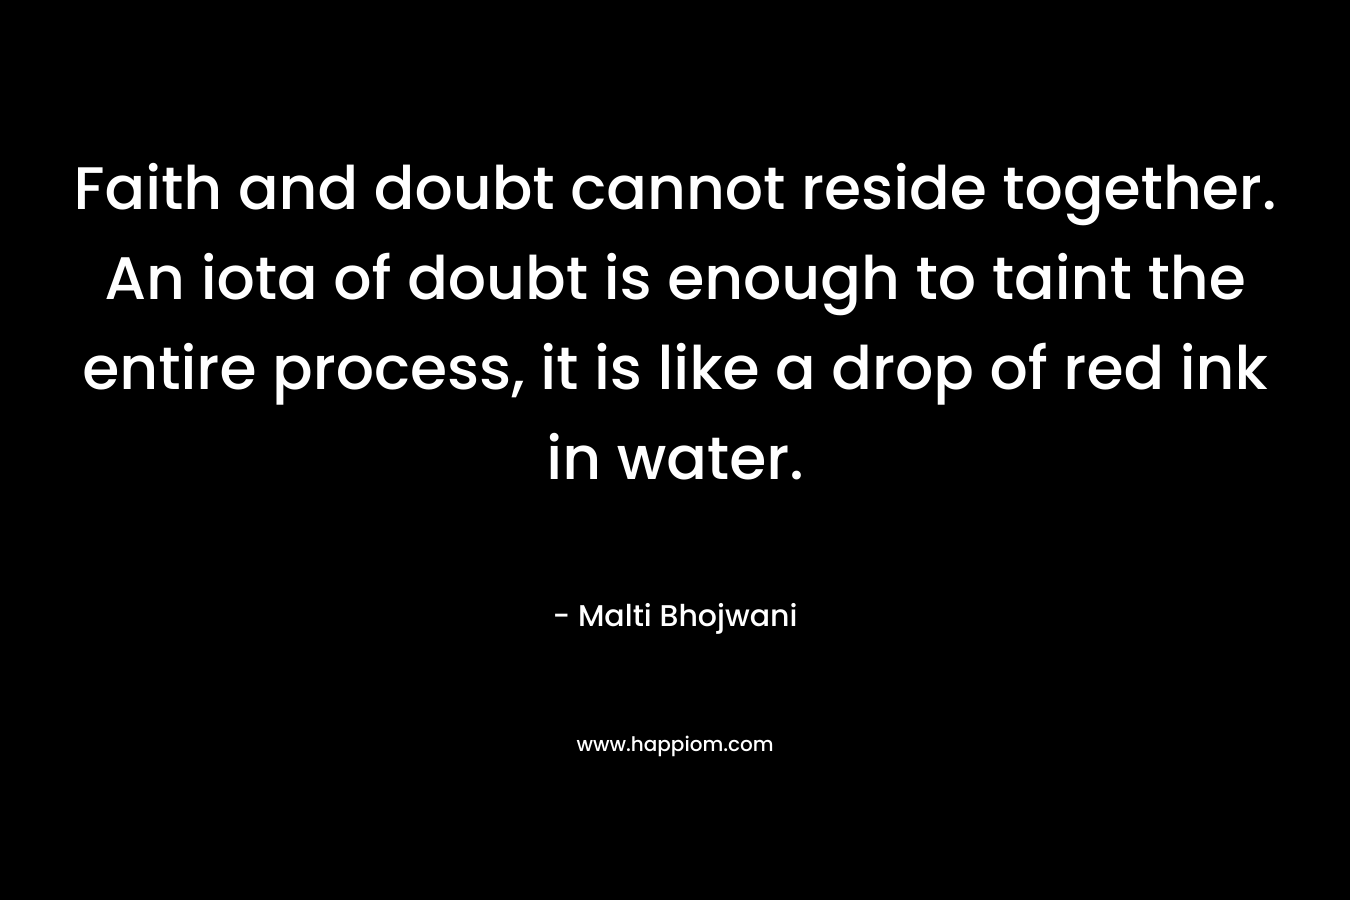 Faith and doubt cannot reside together. An iota of doubt is enough to taint the entire process, it is like a drop of red ink in water. – Malti Bhojwani